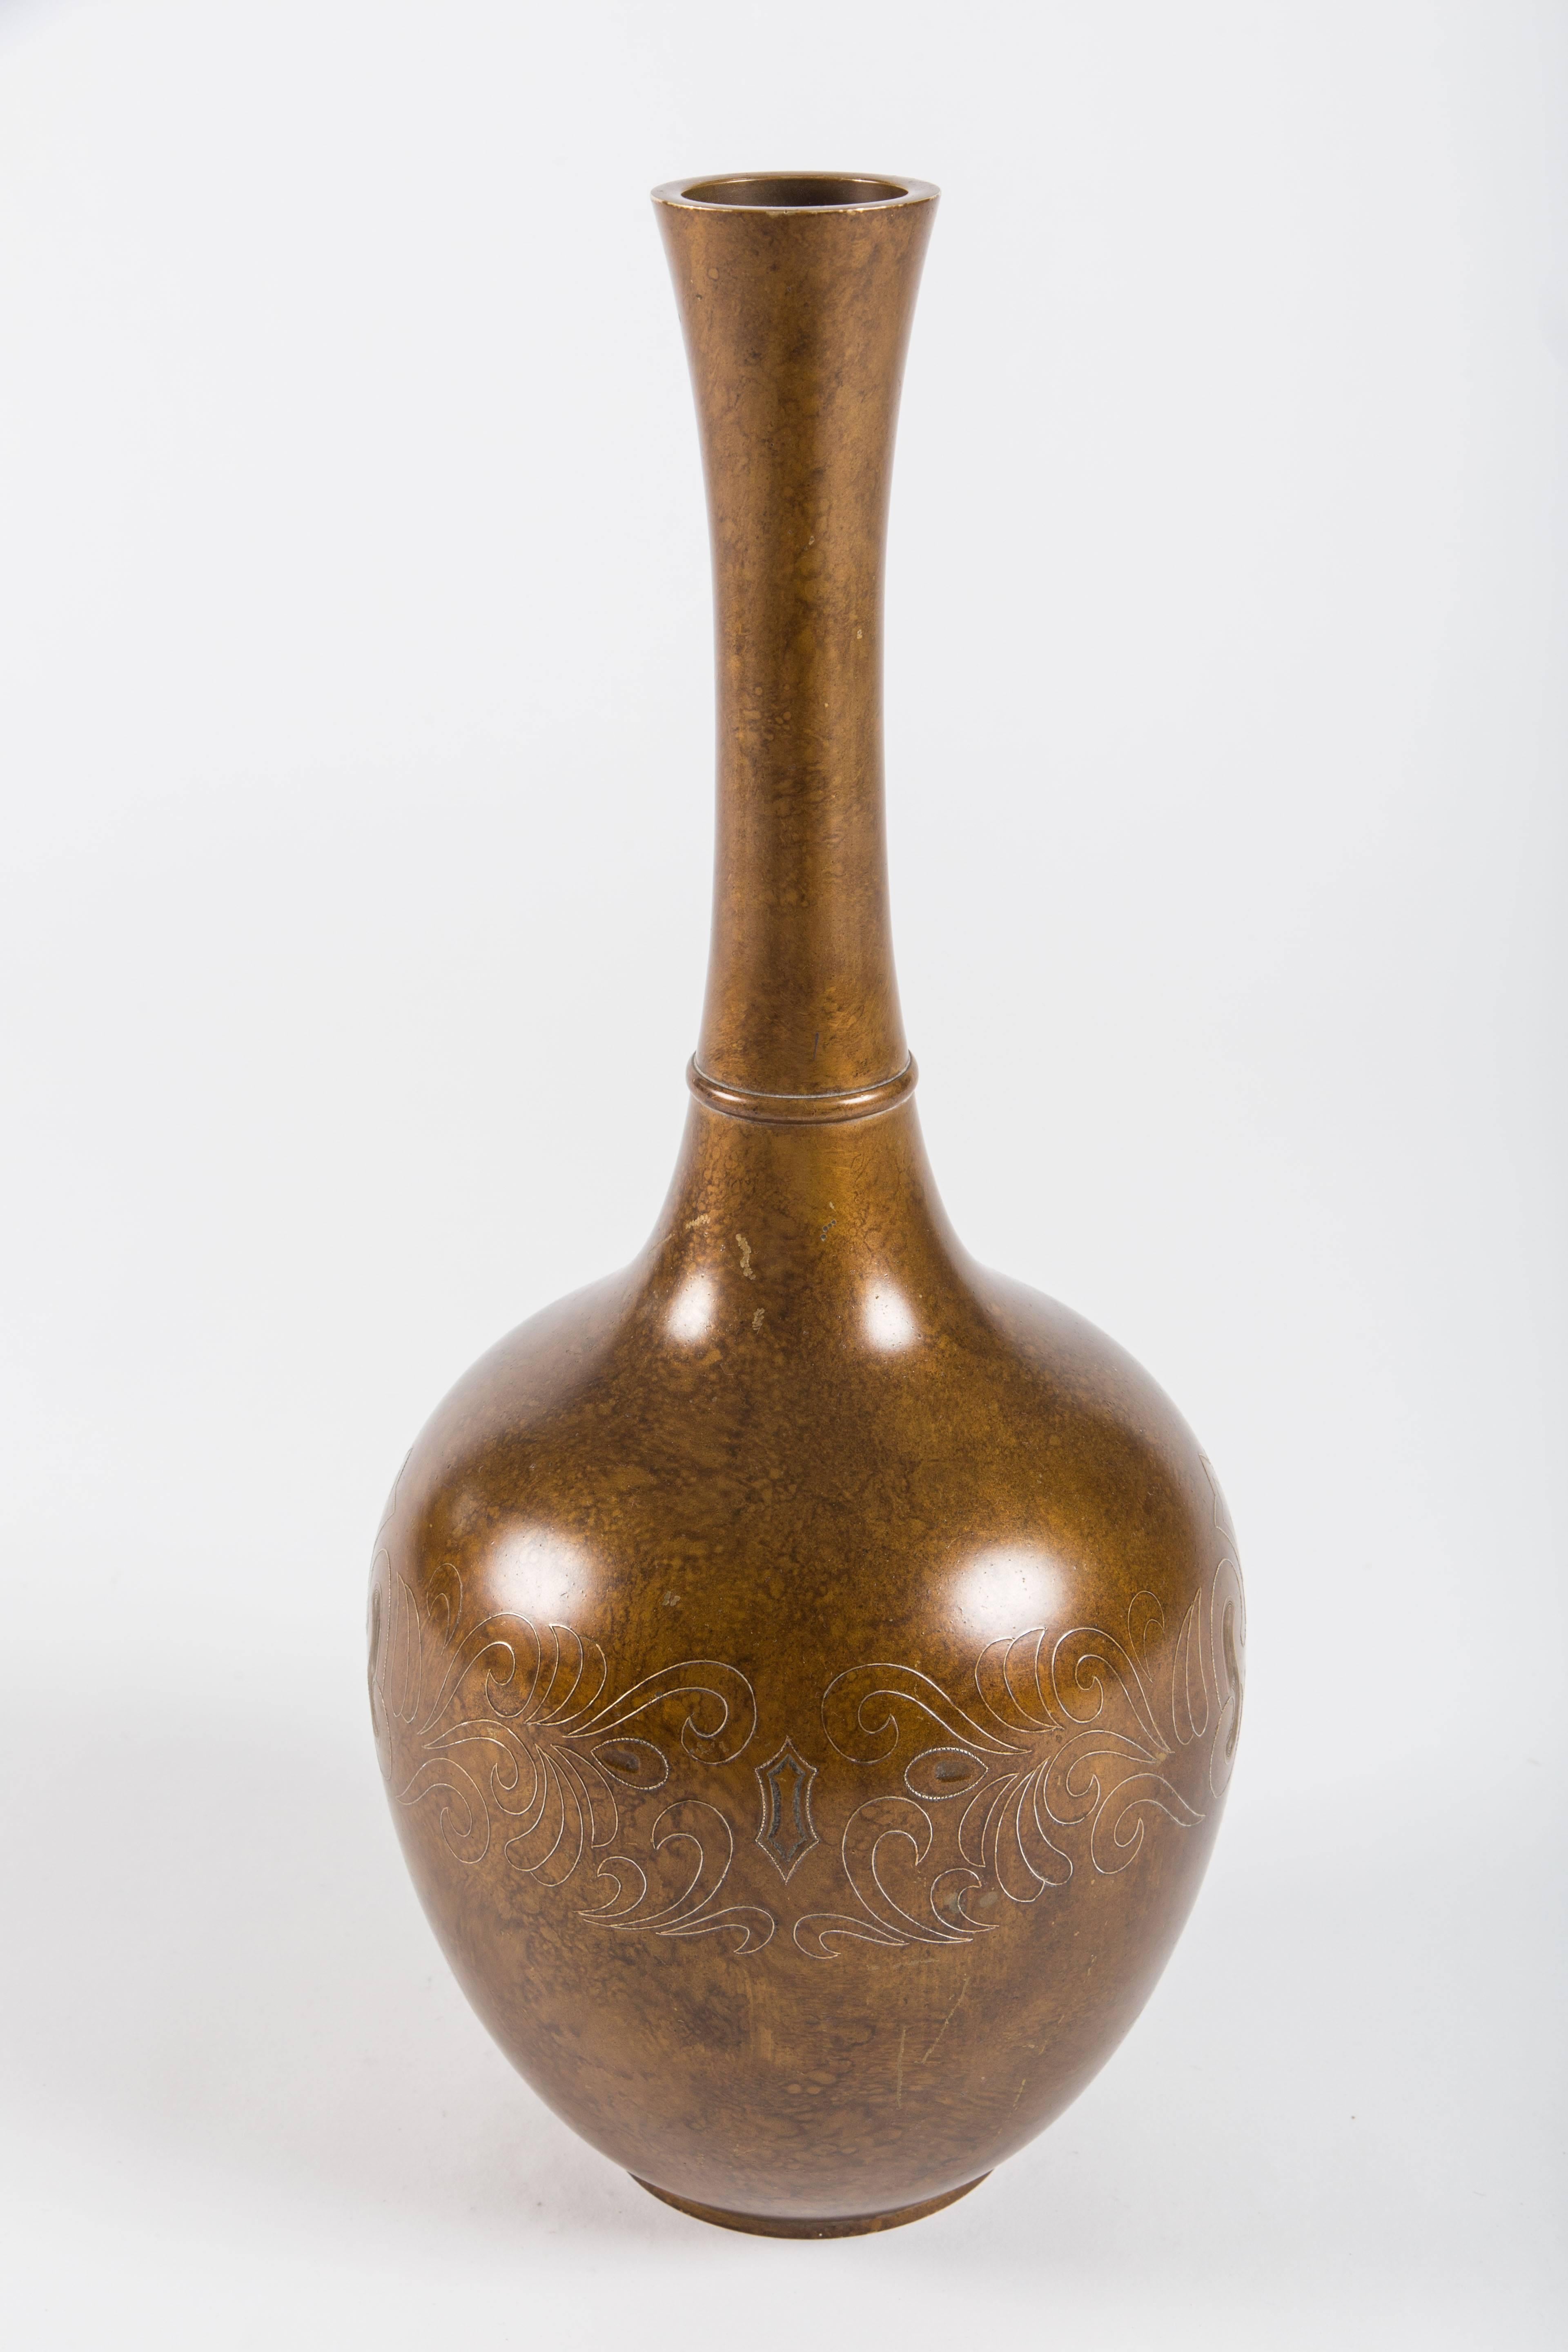 Beautiful long narrow necked vase with decorations reminiscent of Syrian artistic traditions. Features lovely decorative applied metal relief, and engraving. Vase is brass and has a lovely patina.

Measures: 19 1/2 inches high.

